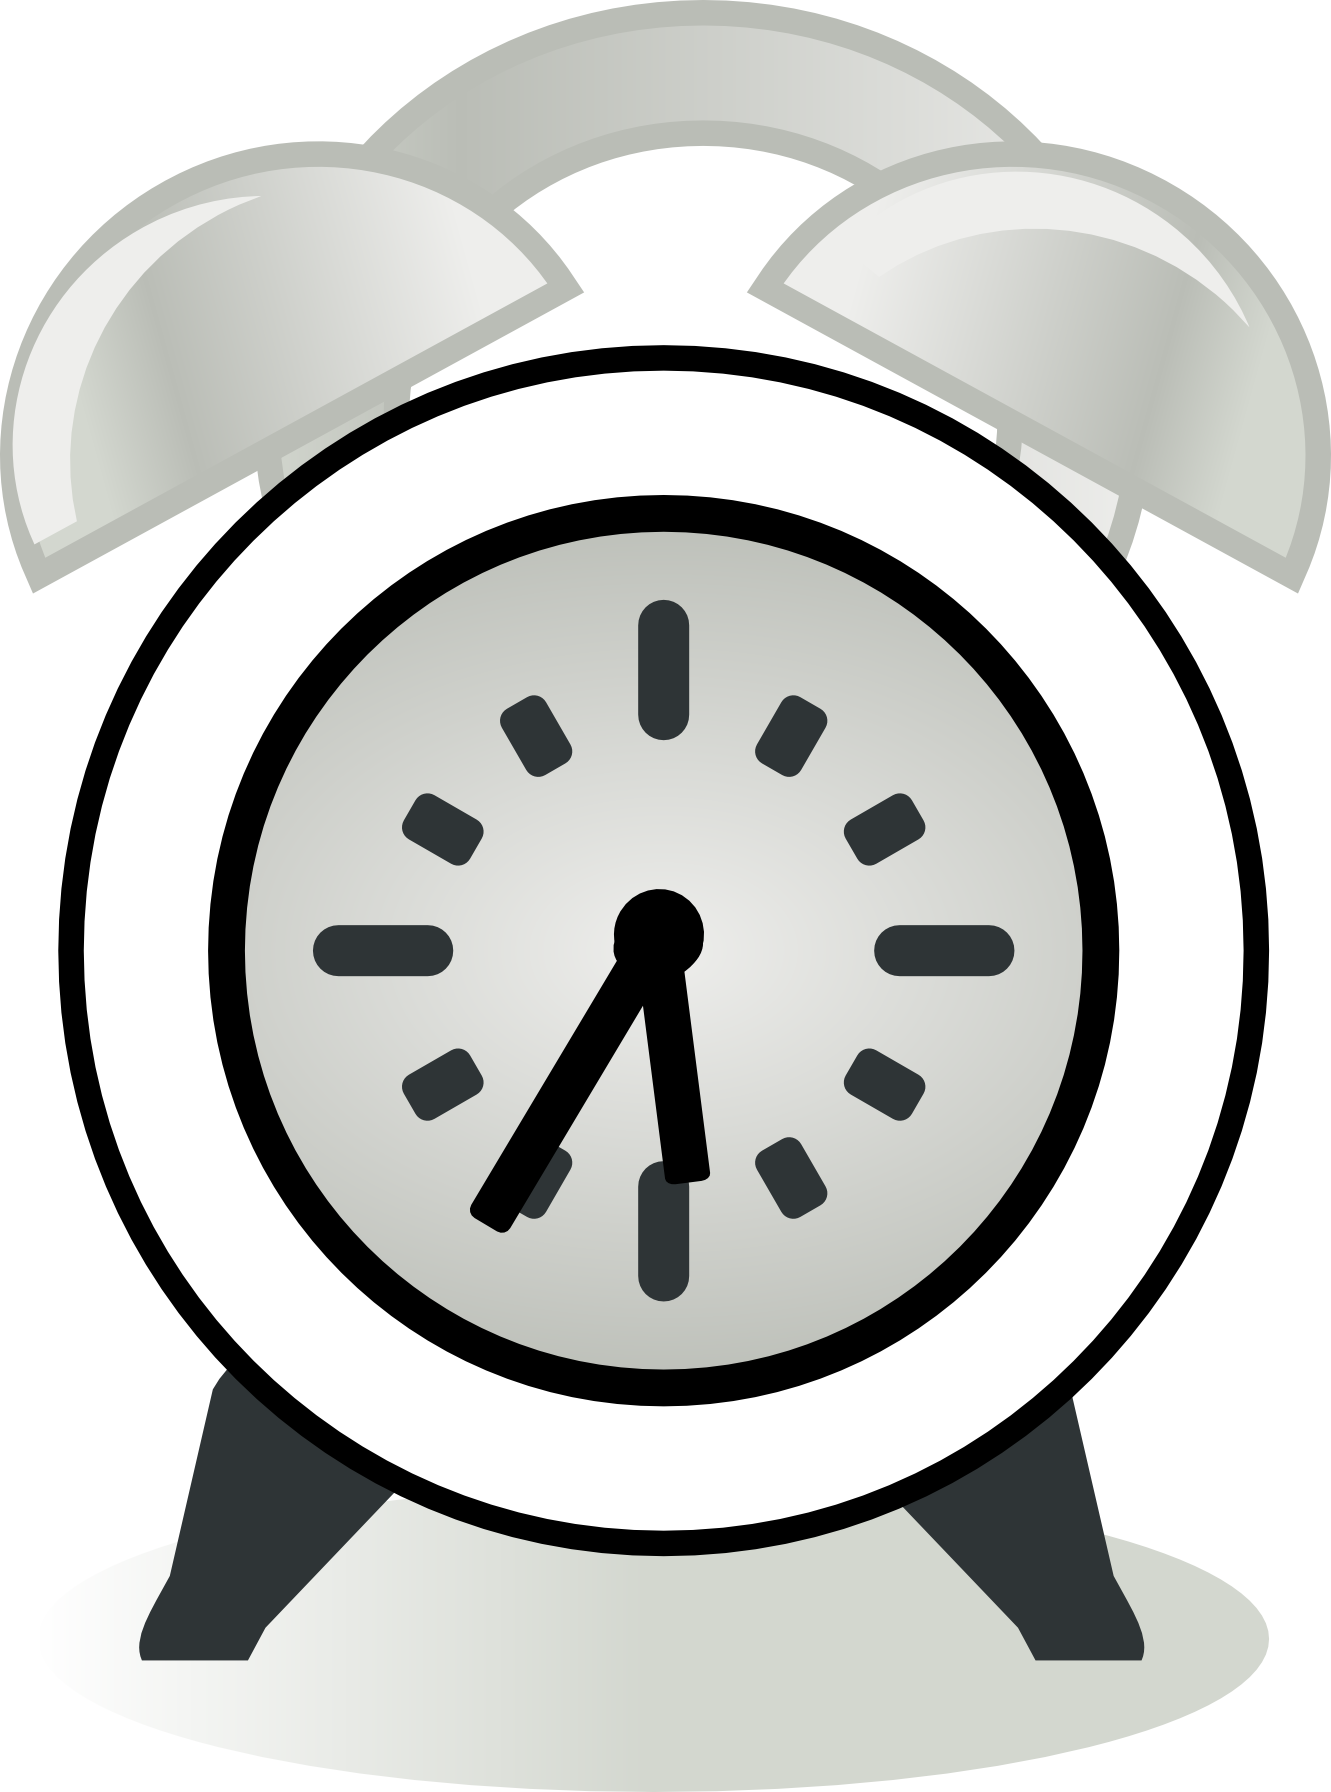 Picture Of An Alarm Clock - ClipArt Best